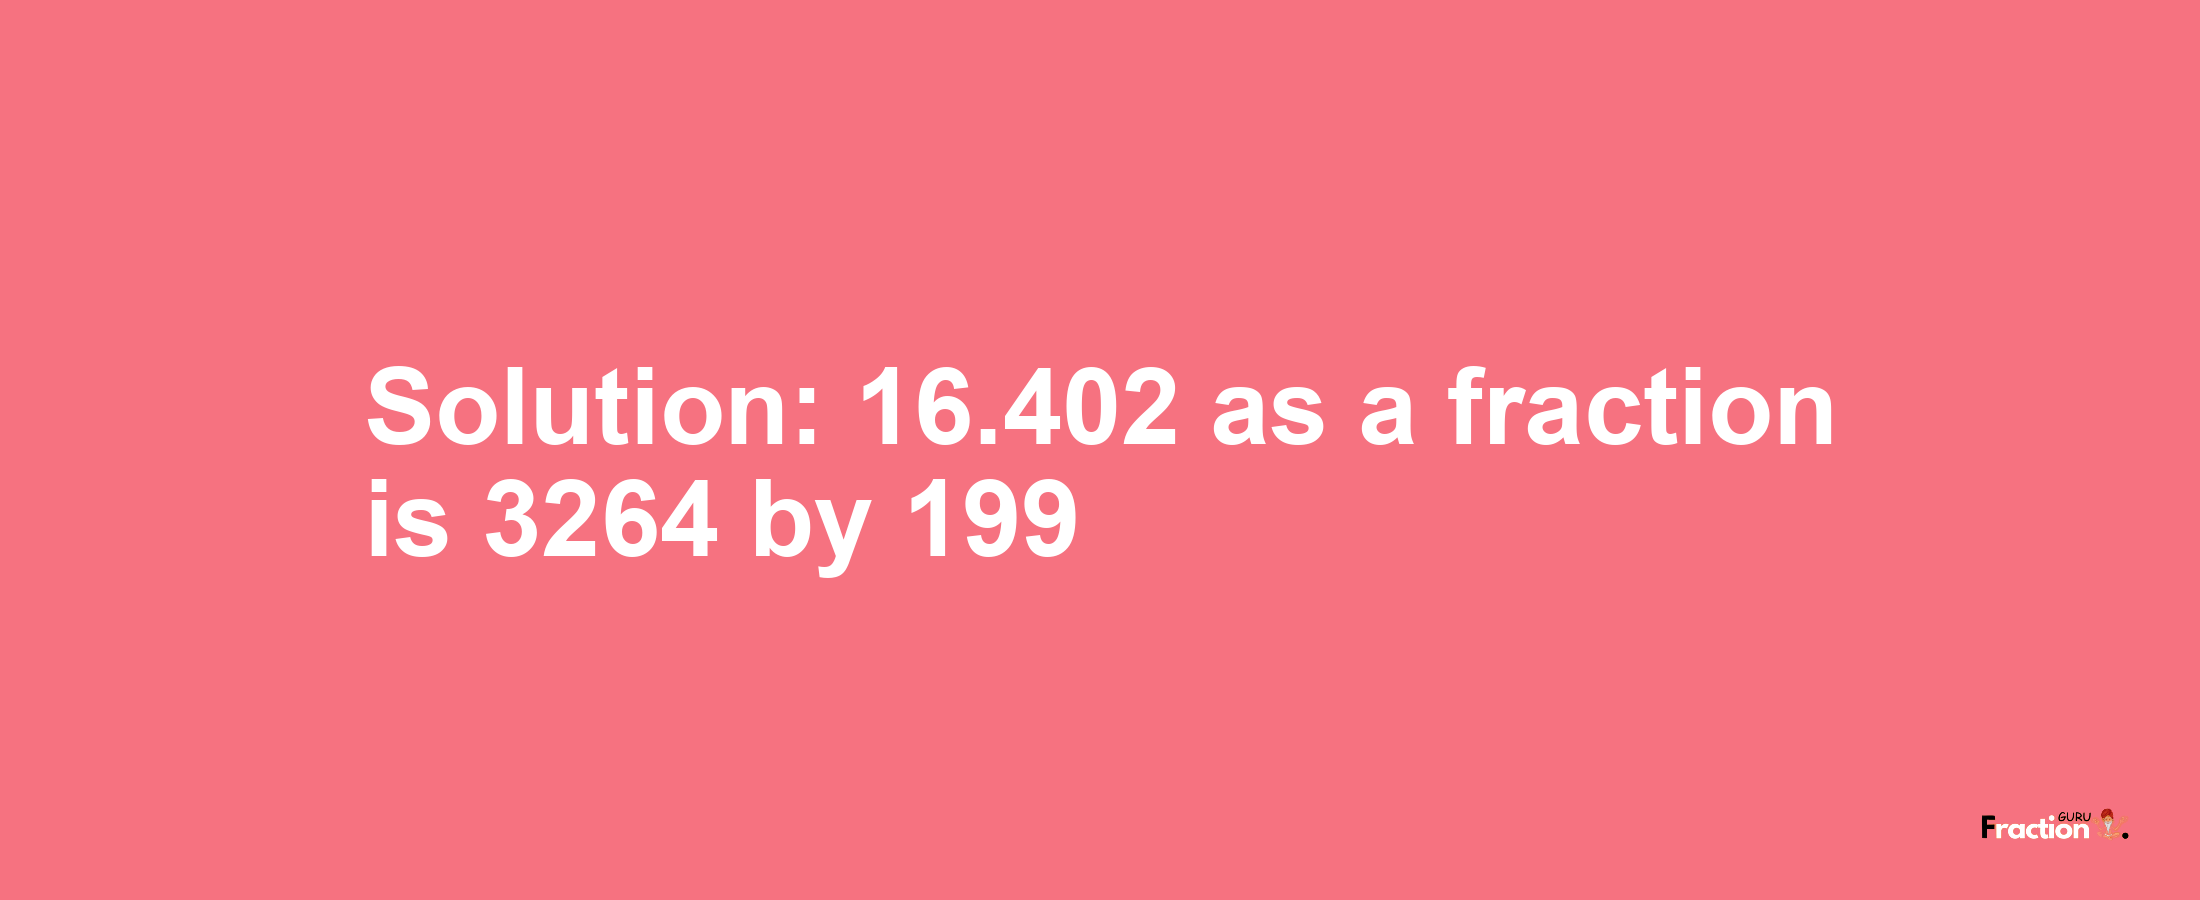 Solution:16.402 as a fraction is 3264/199